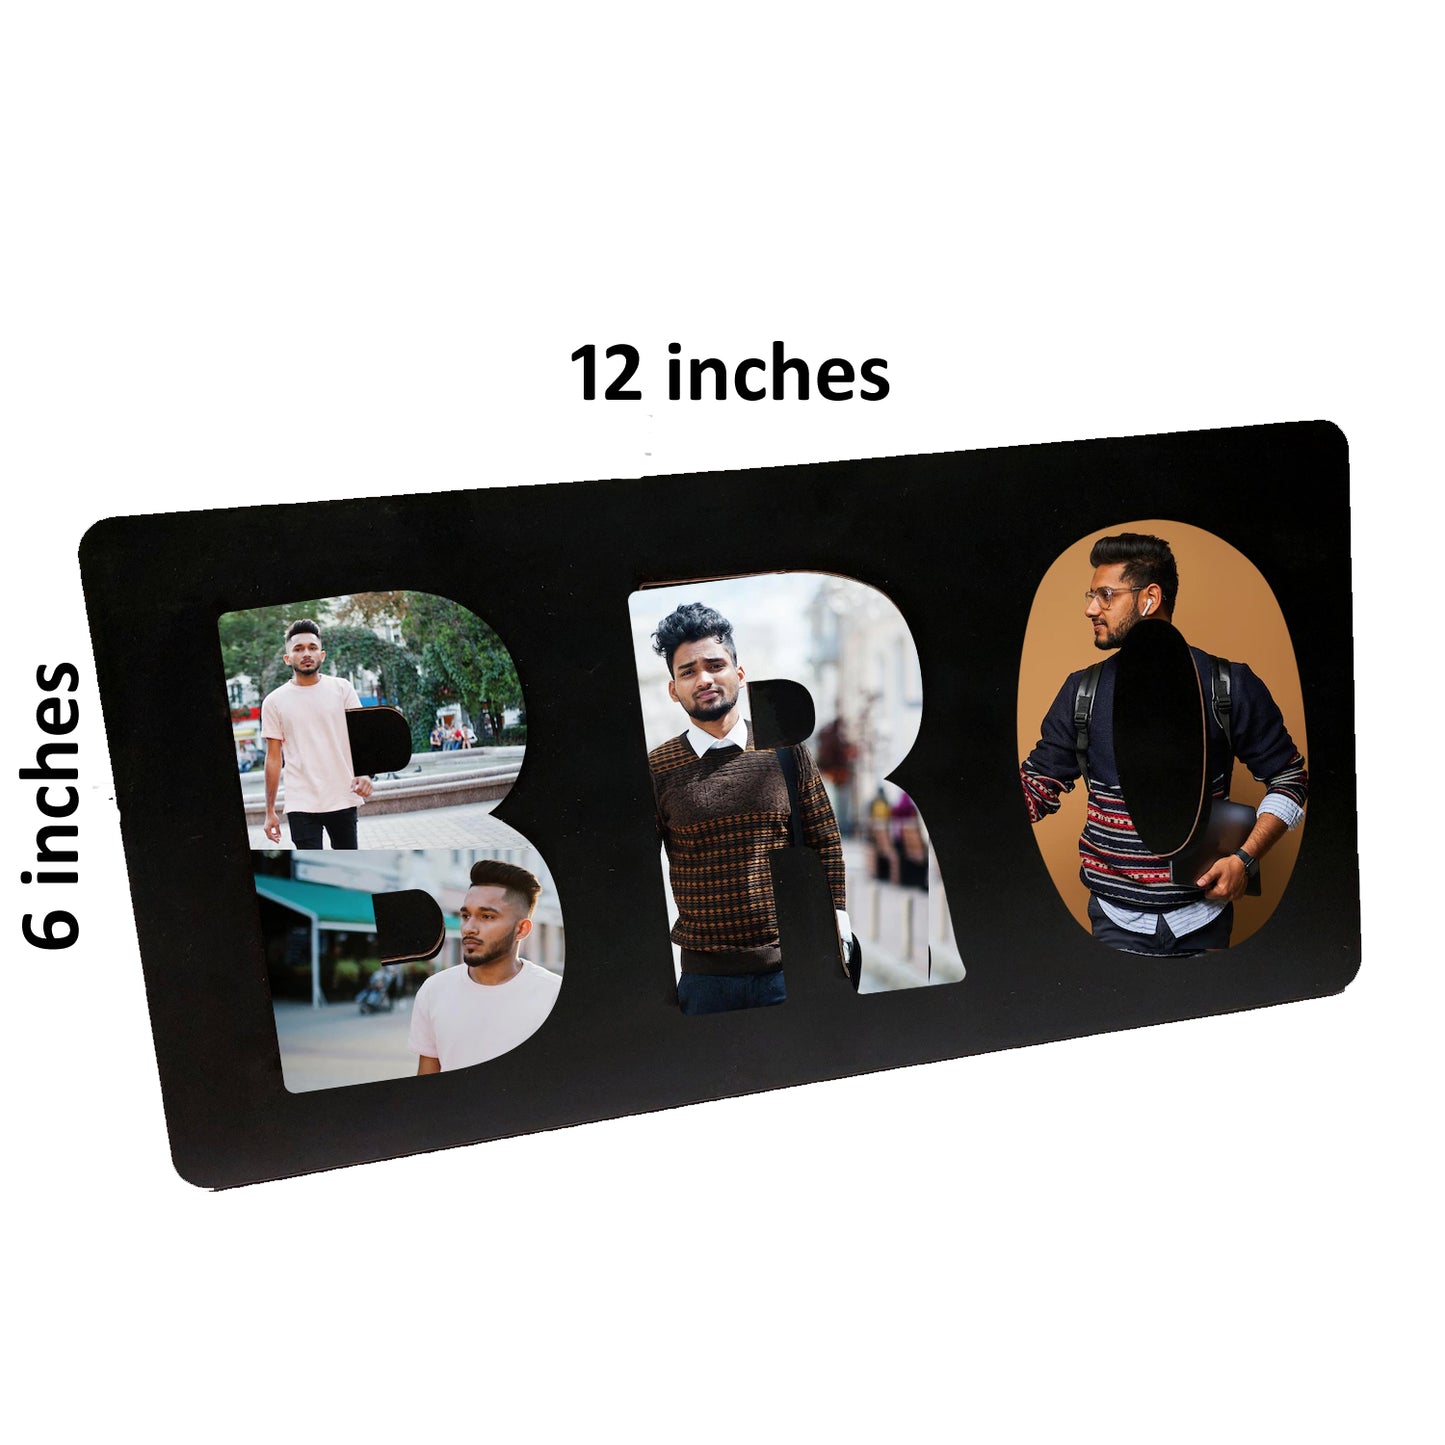 Personalized BRO Frame 6X12 inches | Gifts for brother